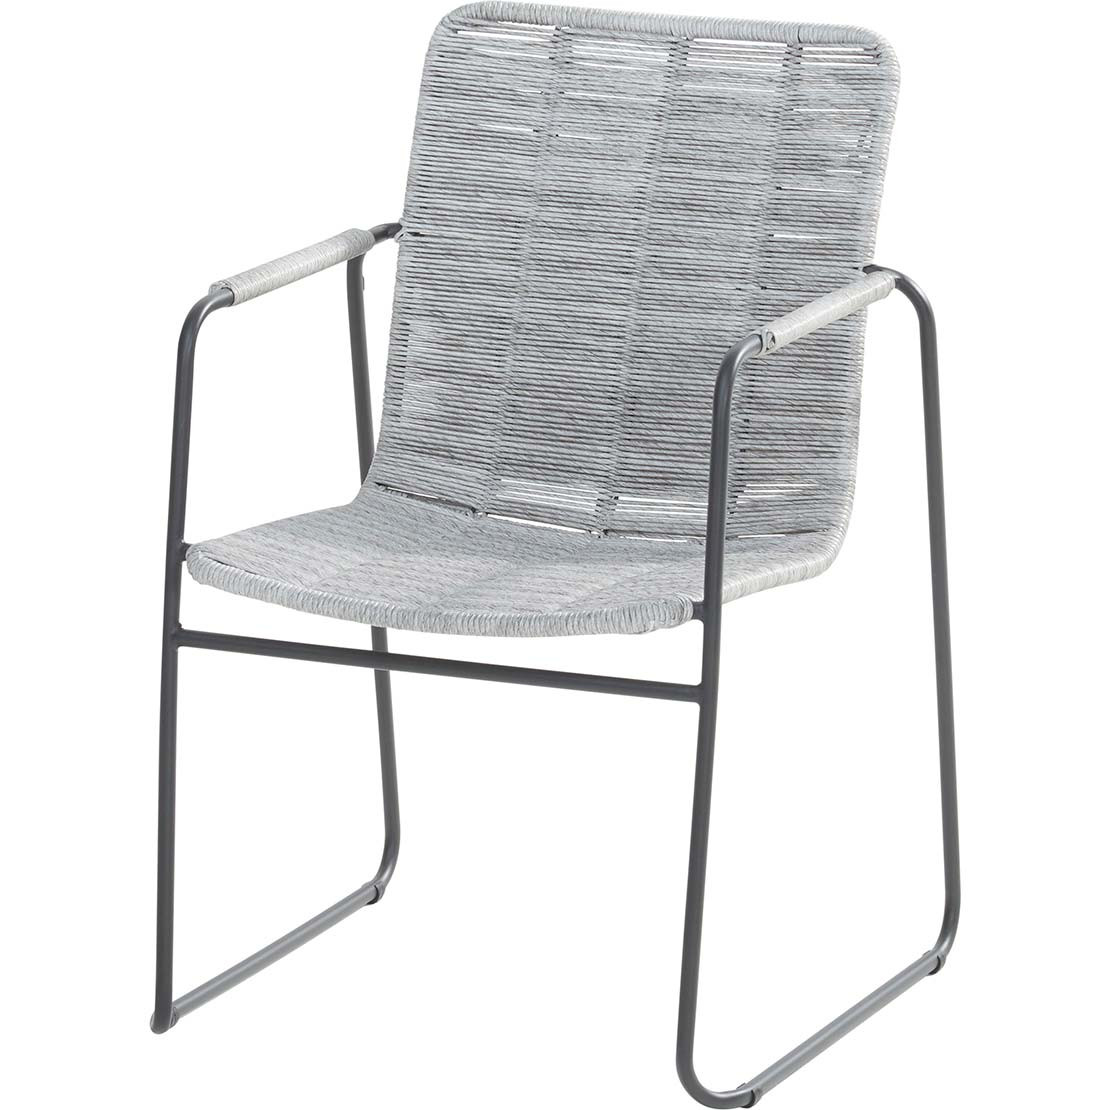 Palma stacking chair Anthracite with Light Grey